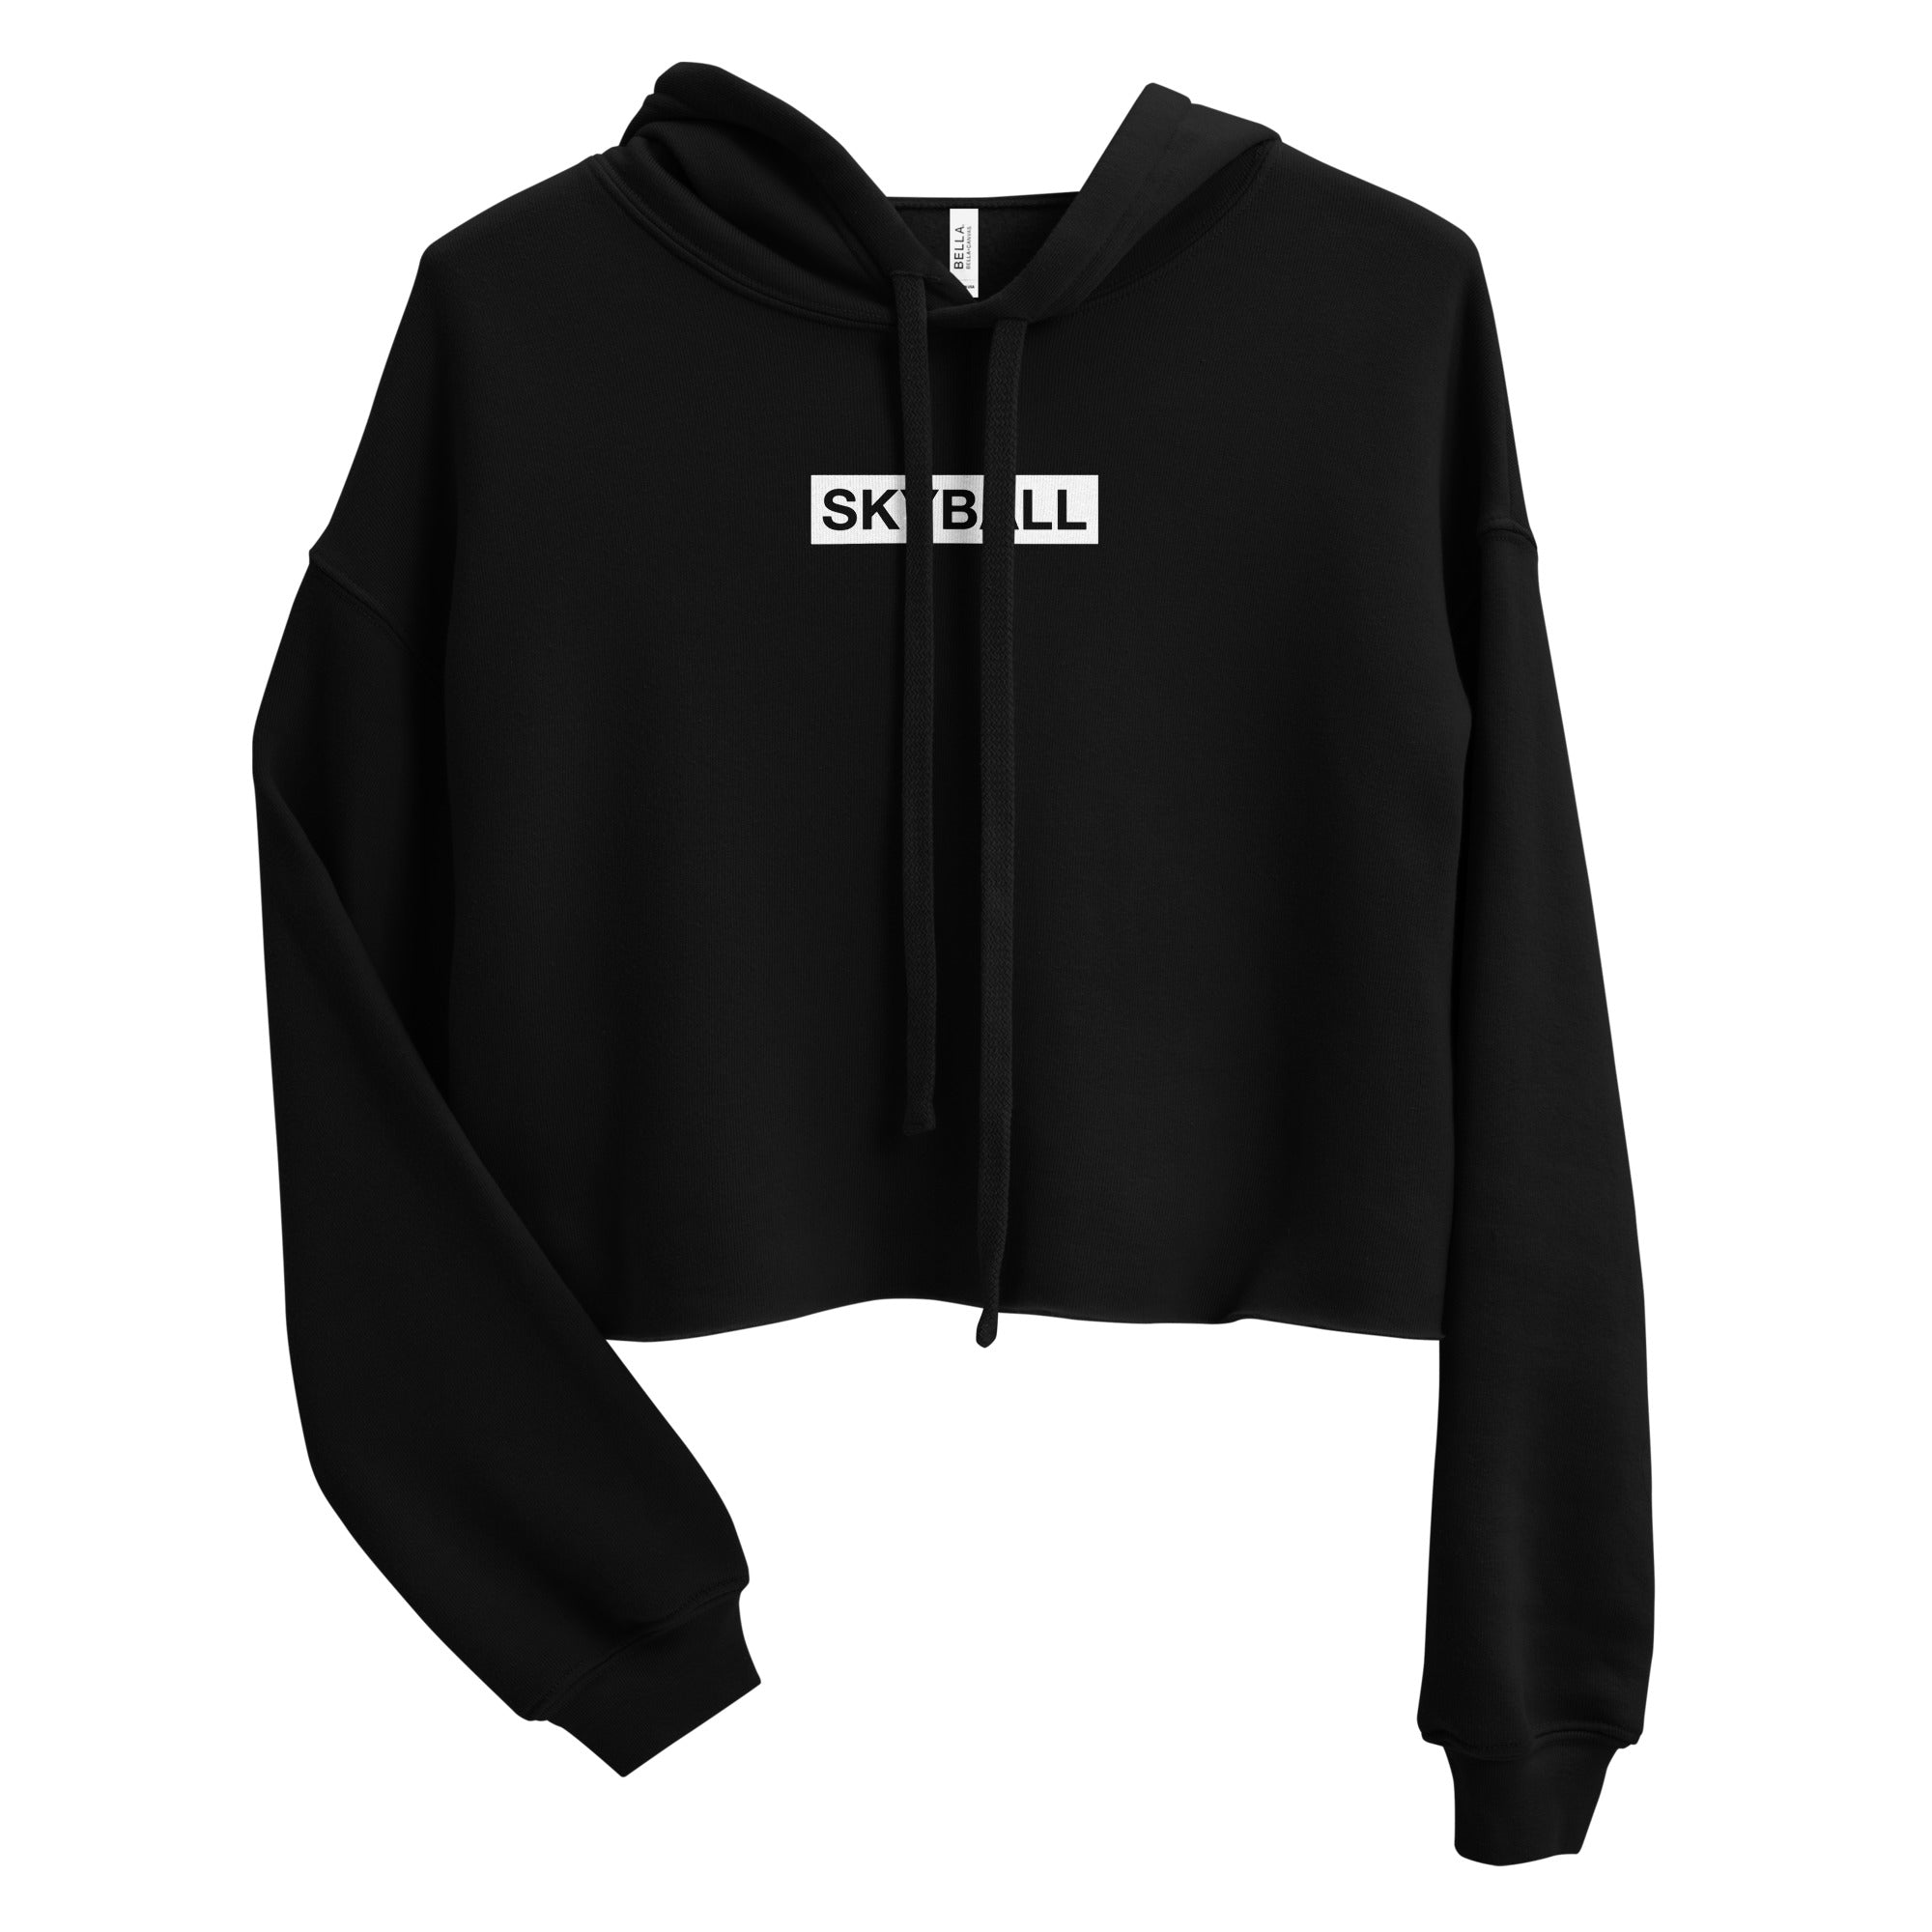 Skyball Beach Volleyball Apparel - Reverse Cropped Hoodie